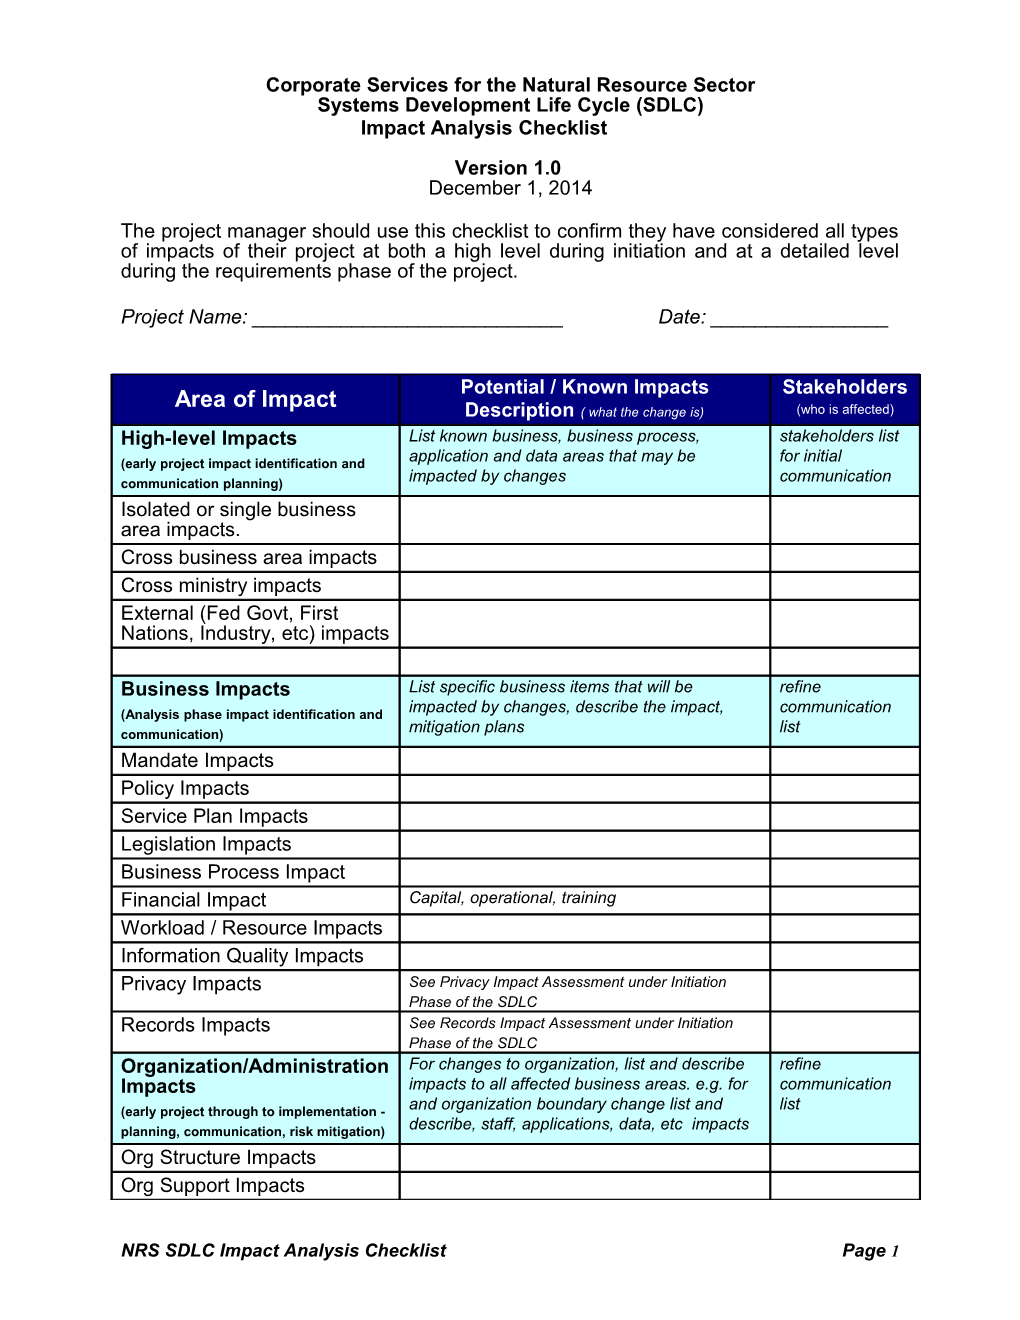 Impact Analysis Checklist for Requirements Changes